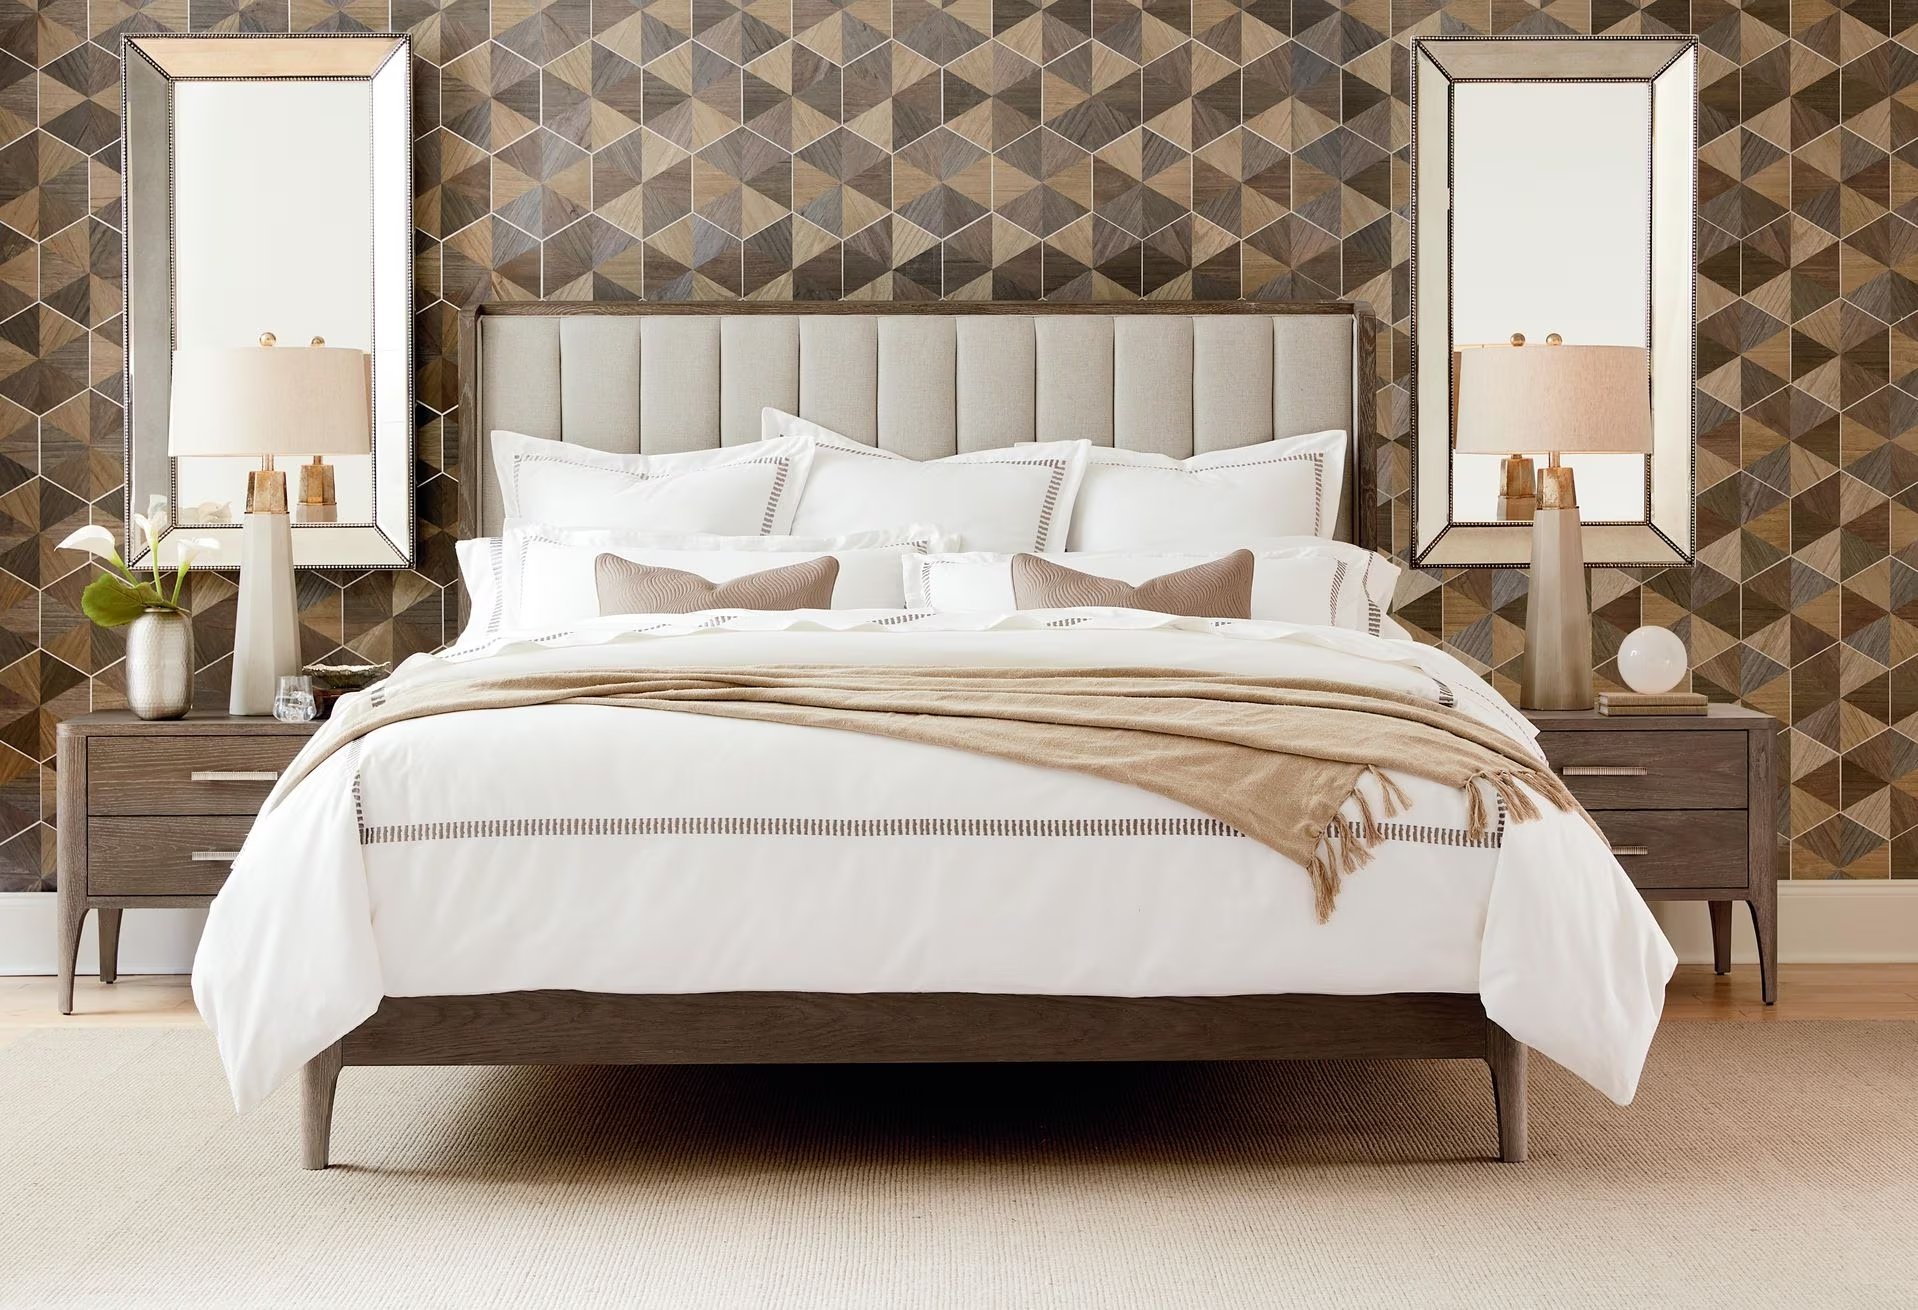 Choose Bedding to Dress Your Perfect Bed